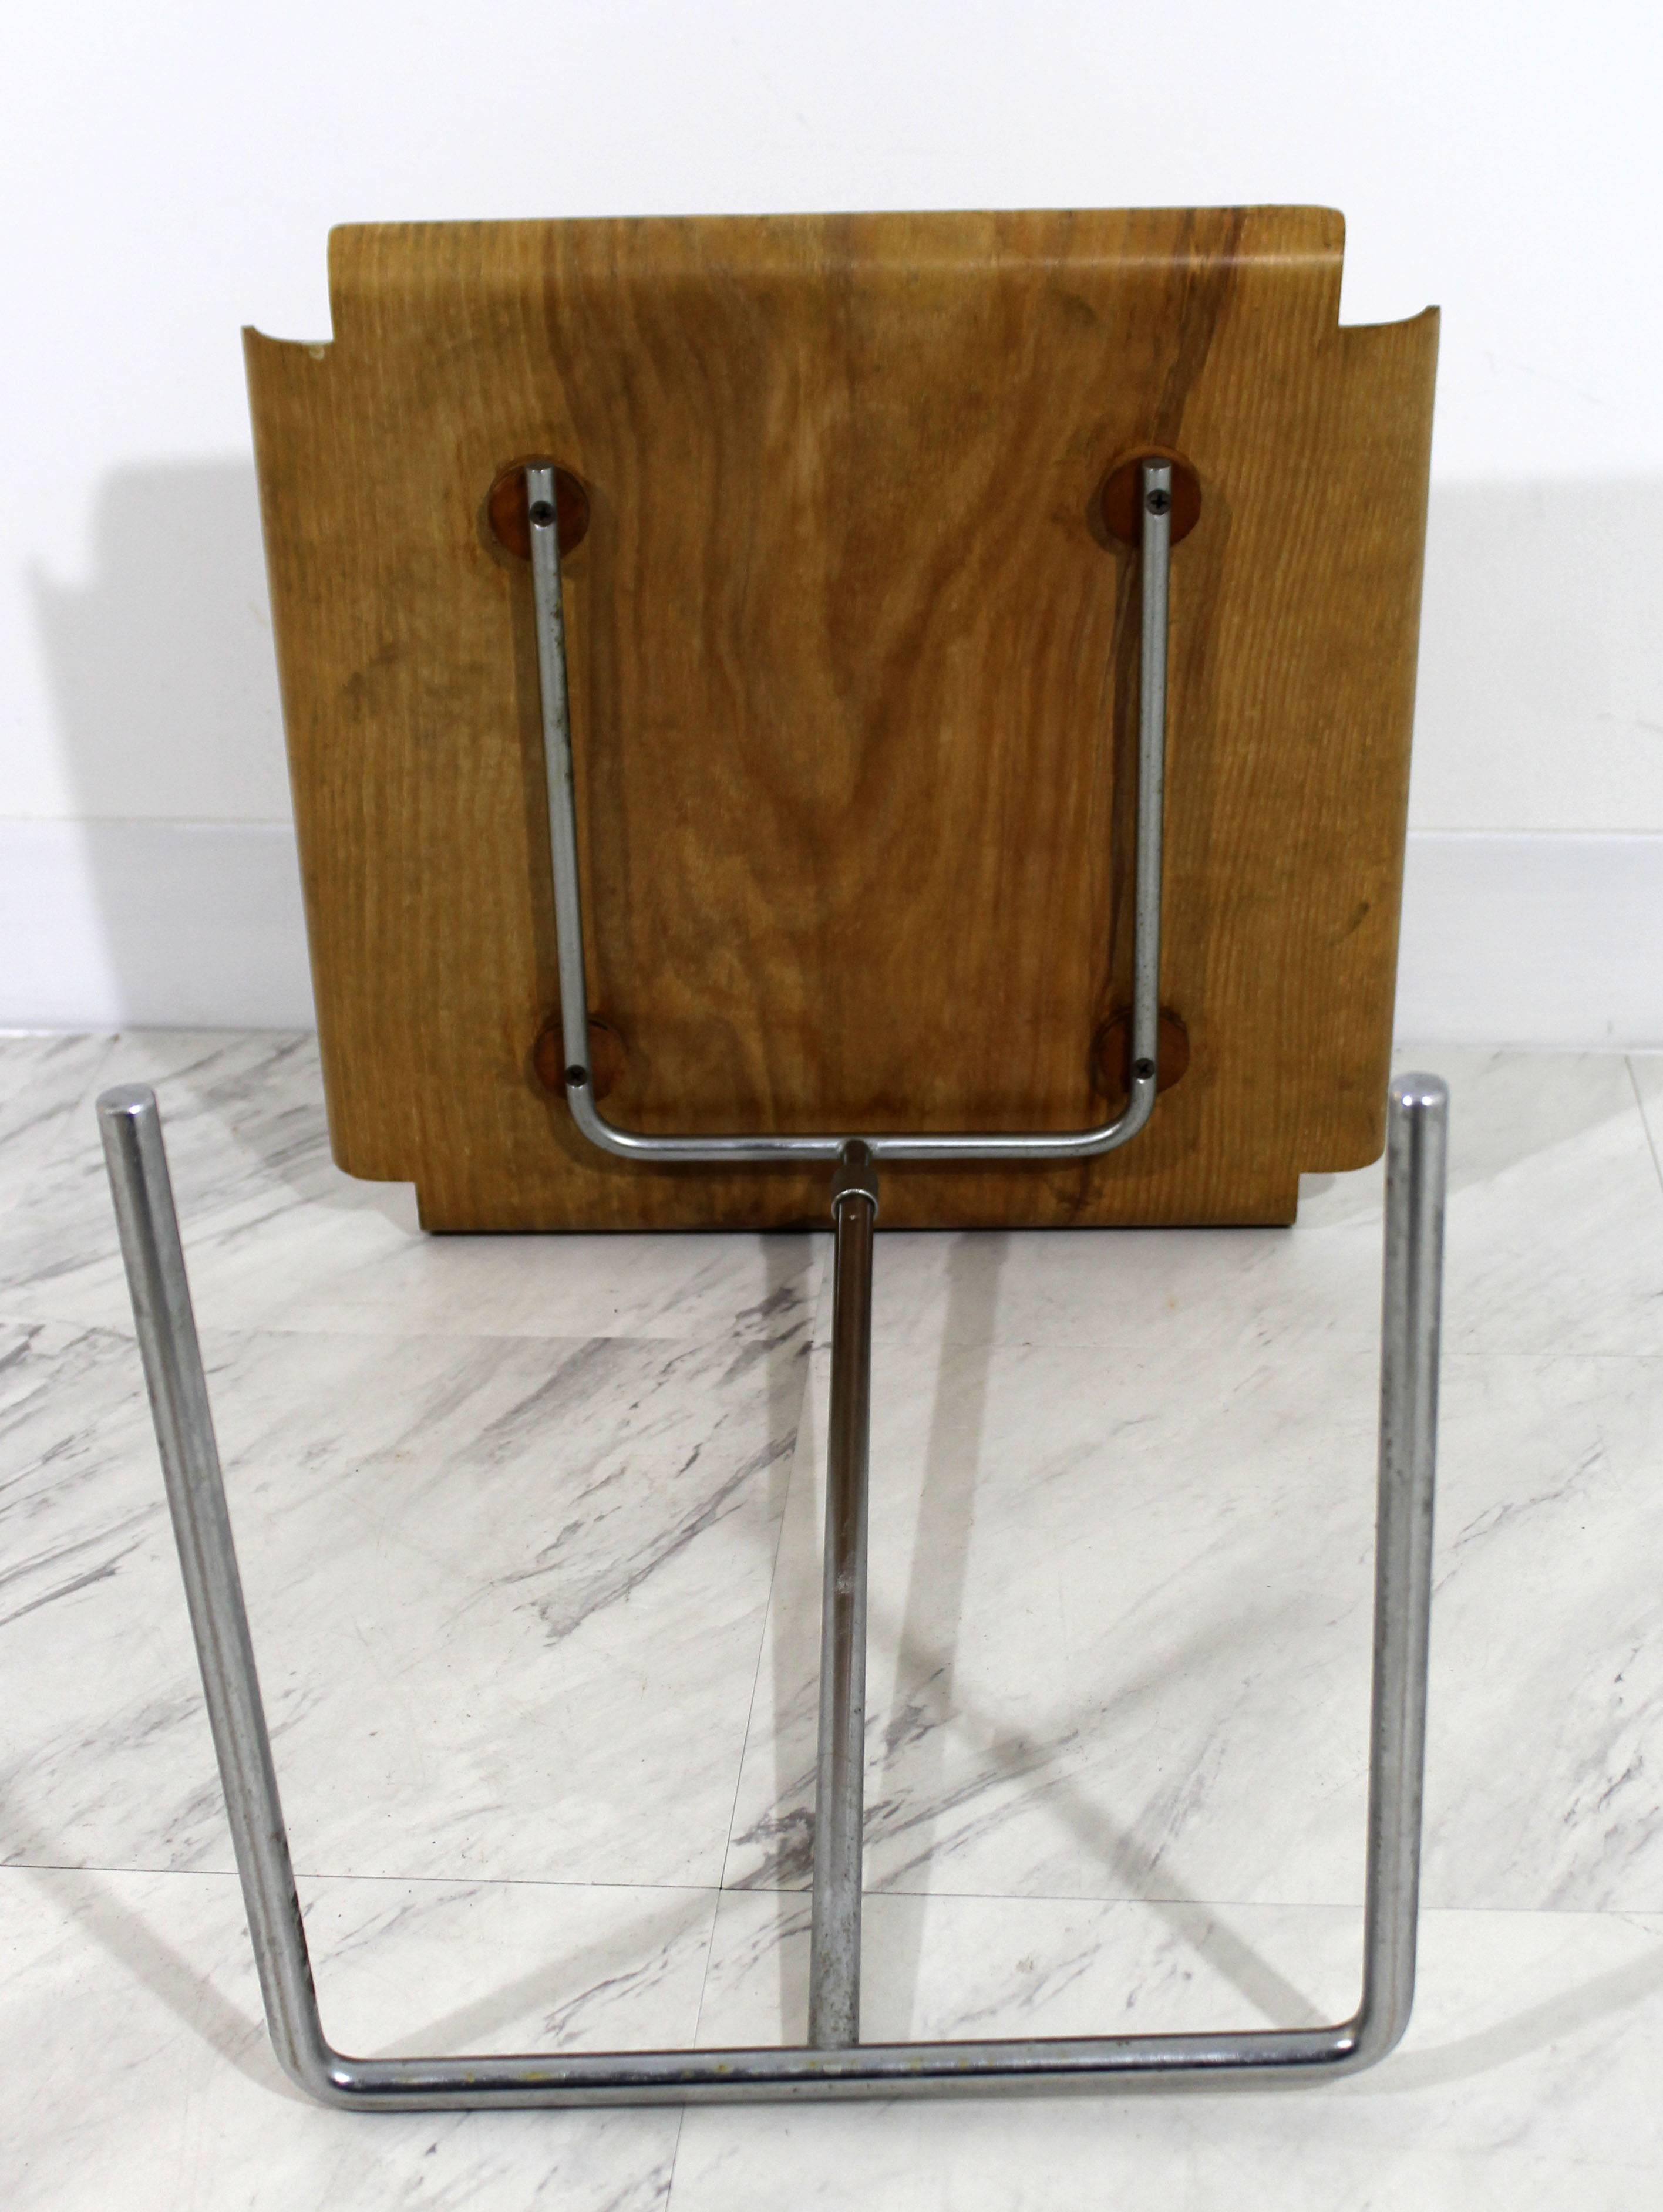 American Mid-Century Modern George Nelson Early Edition Side Tray Table, 1950s, Wood